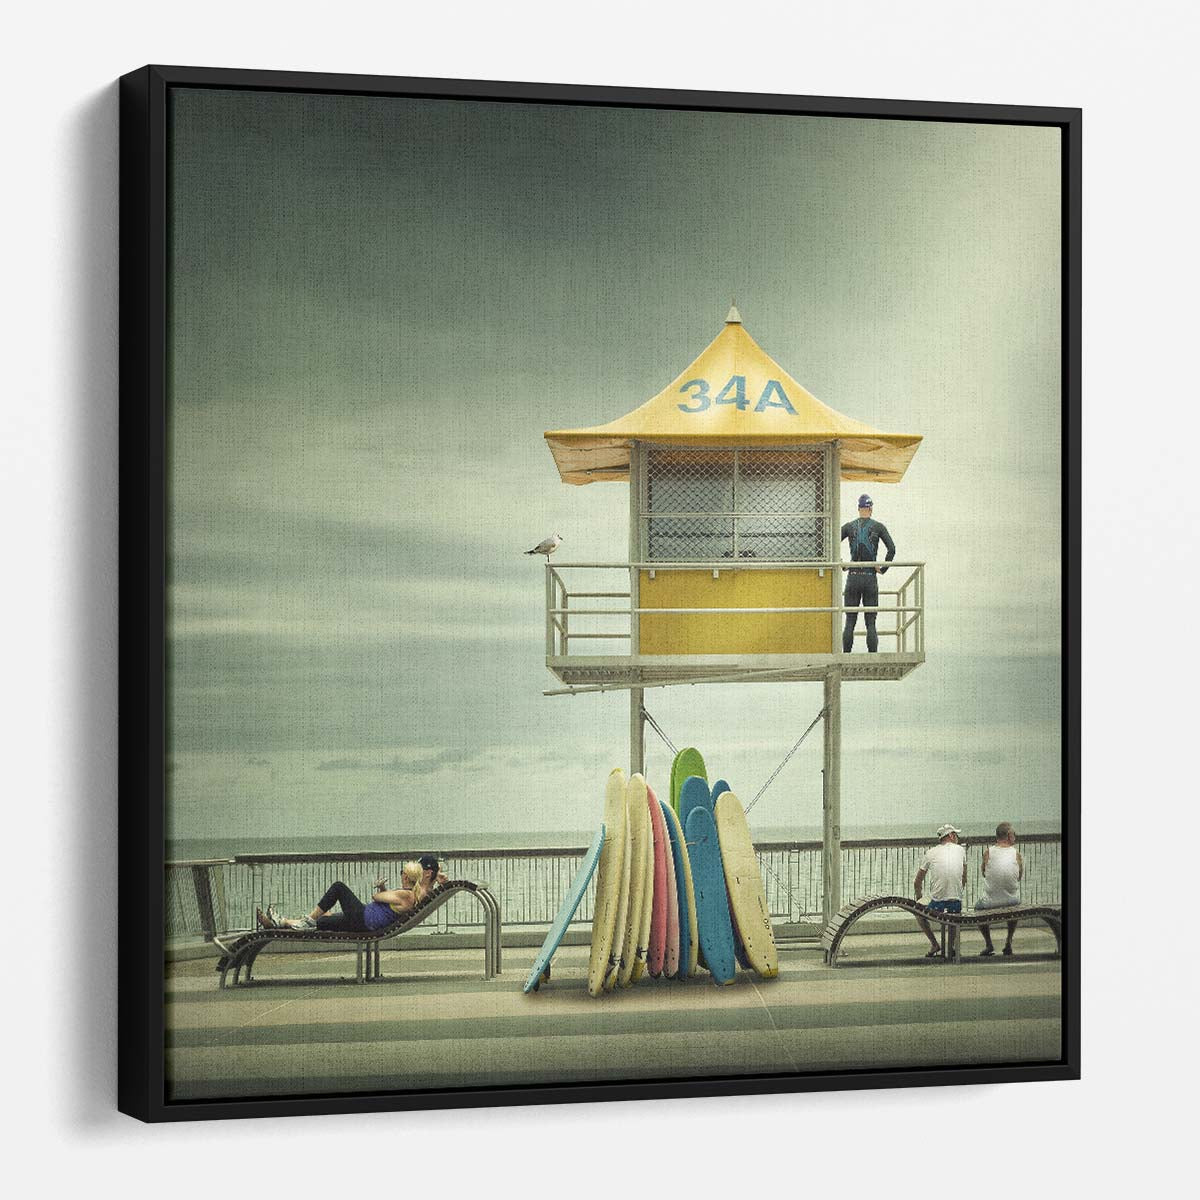 Cityscape and Surf Lifeguard Tower Beach Photography Wall Art by Luxuriance Designs. Made in USA.